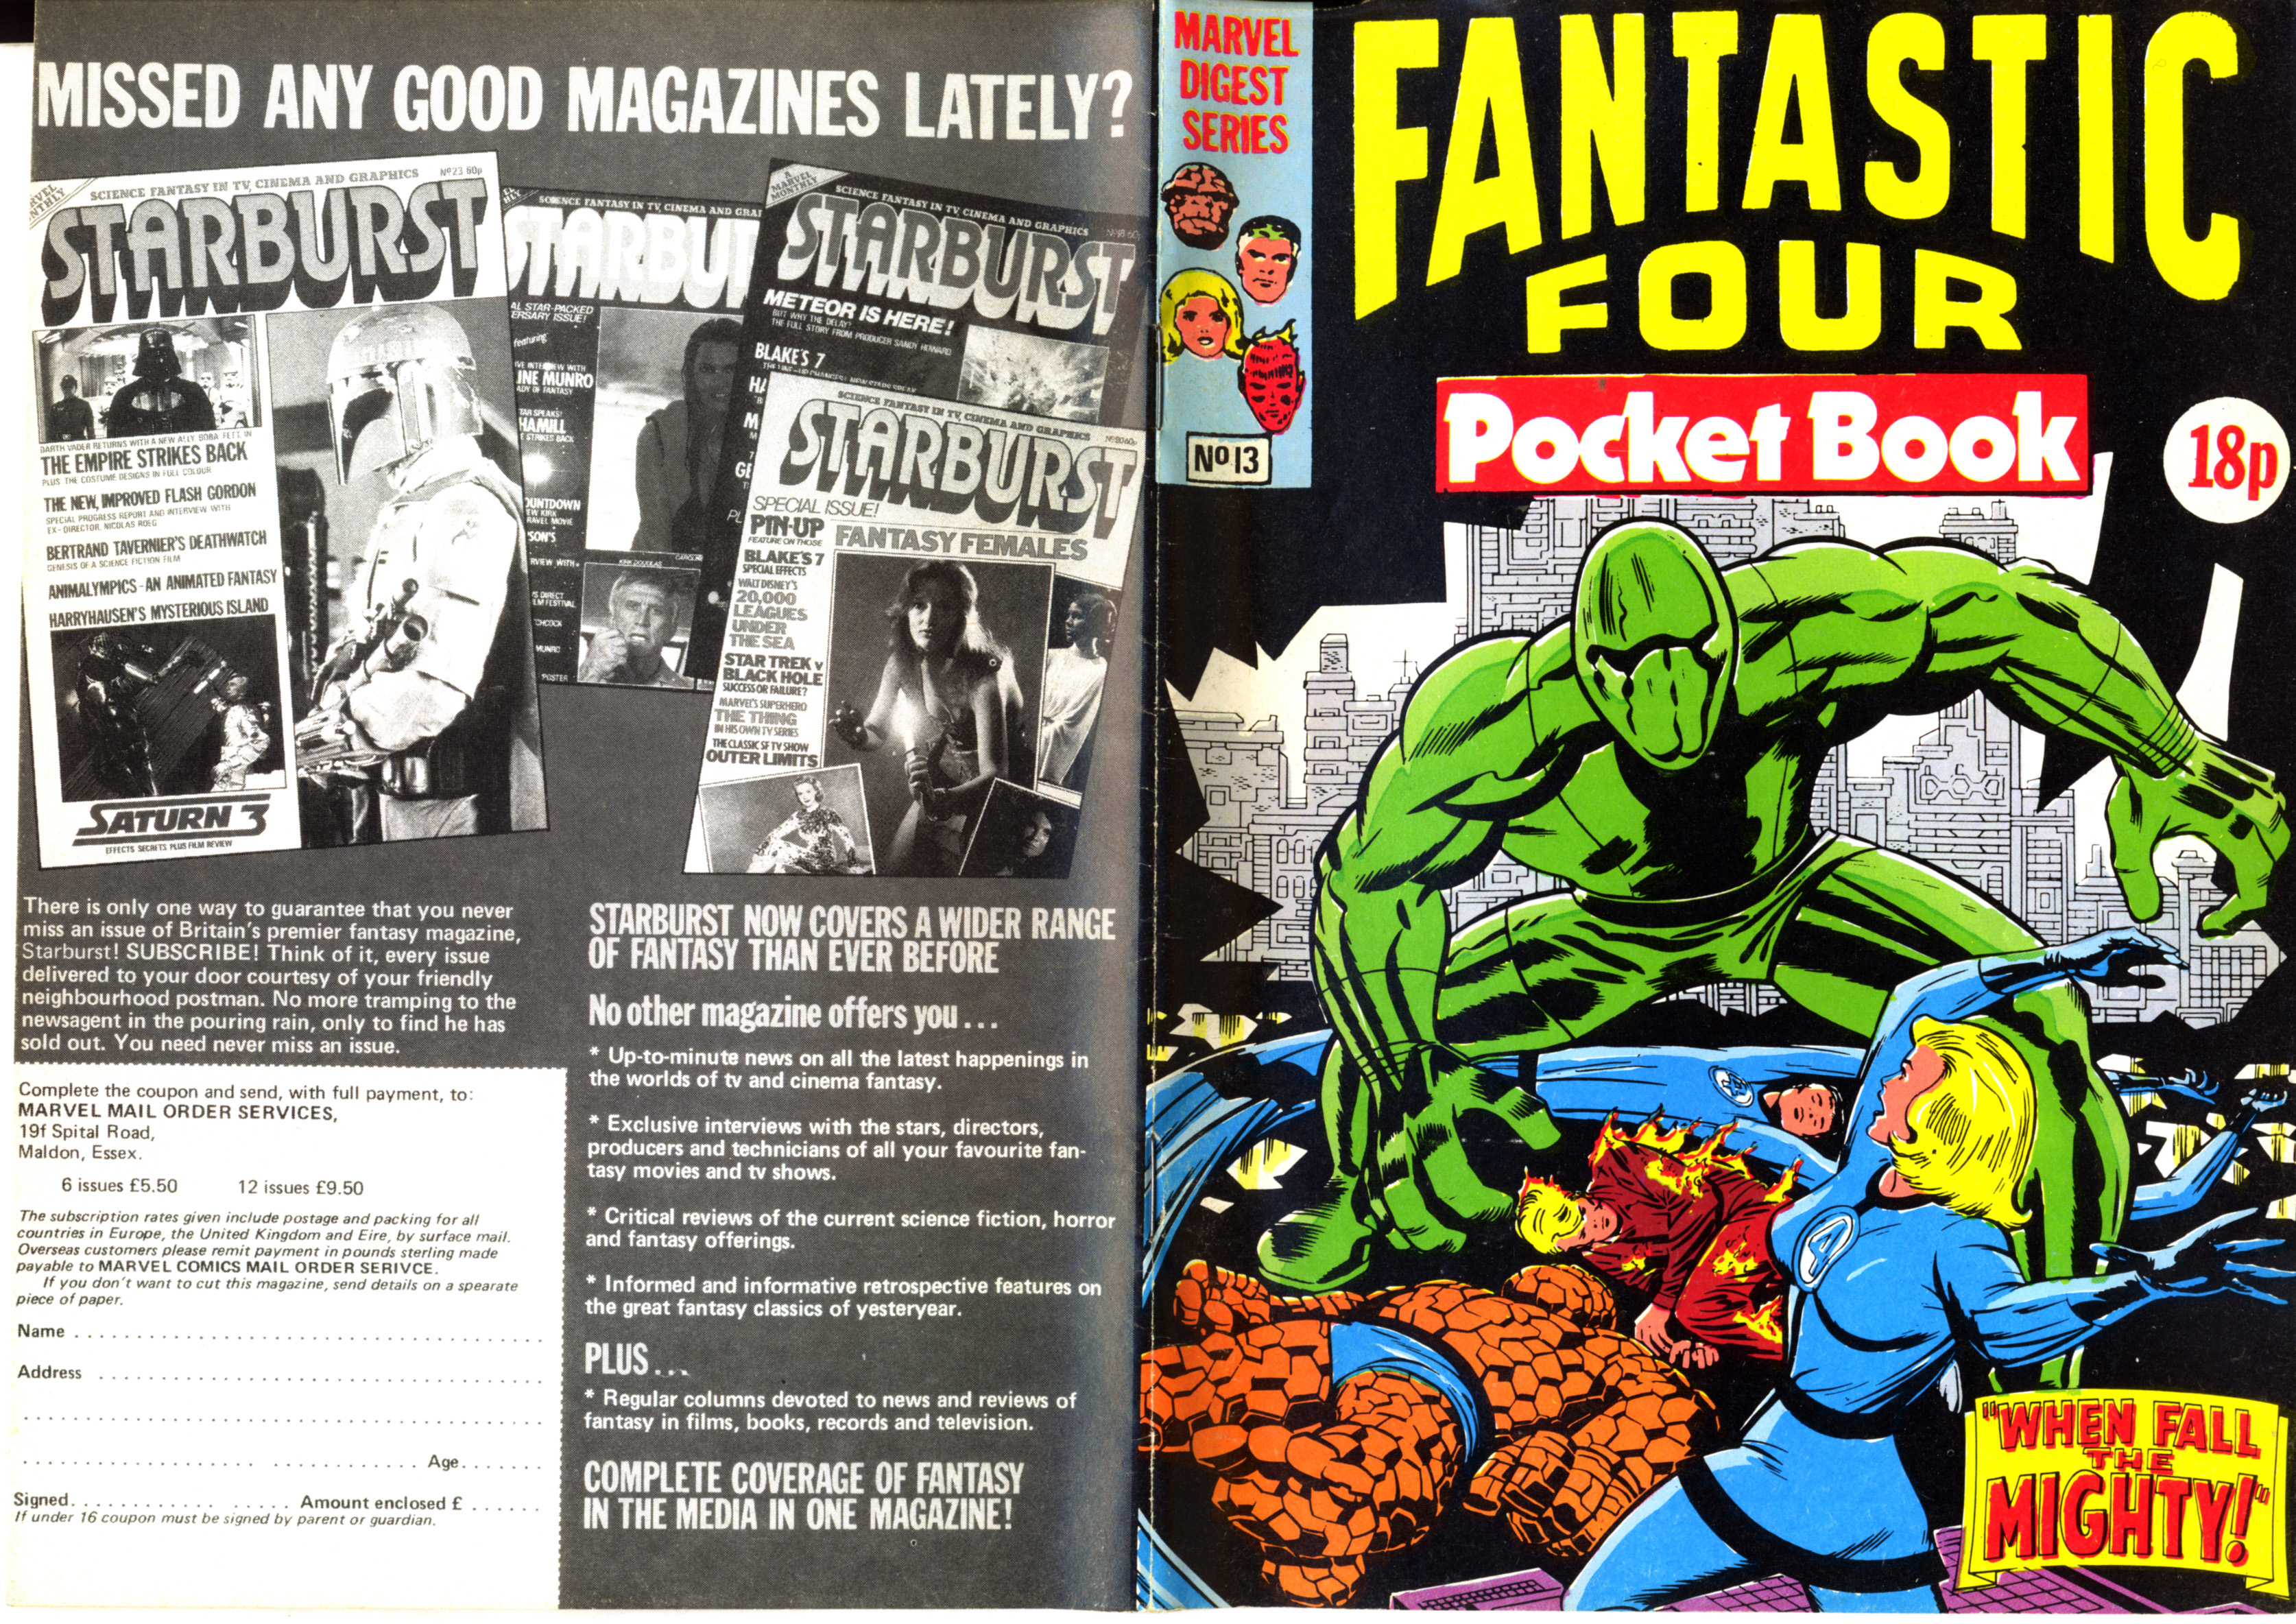 Read online Fantastic Four Pocket Book comic -  Issue #13 - 2